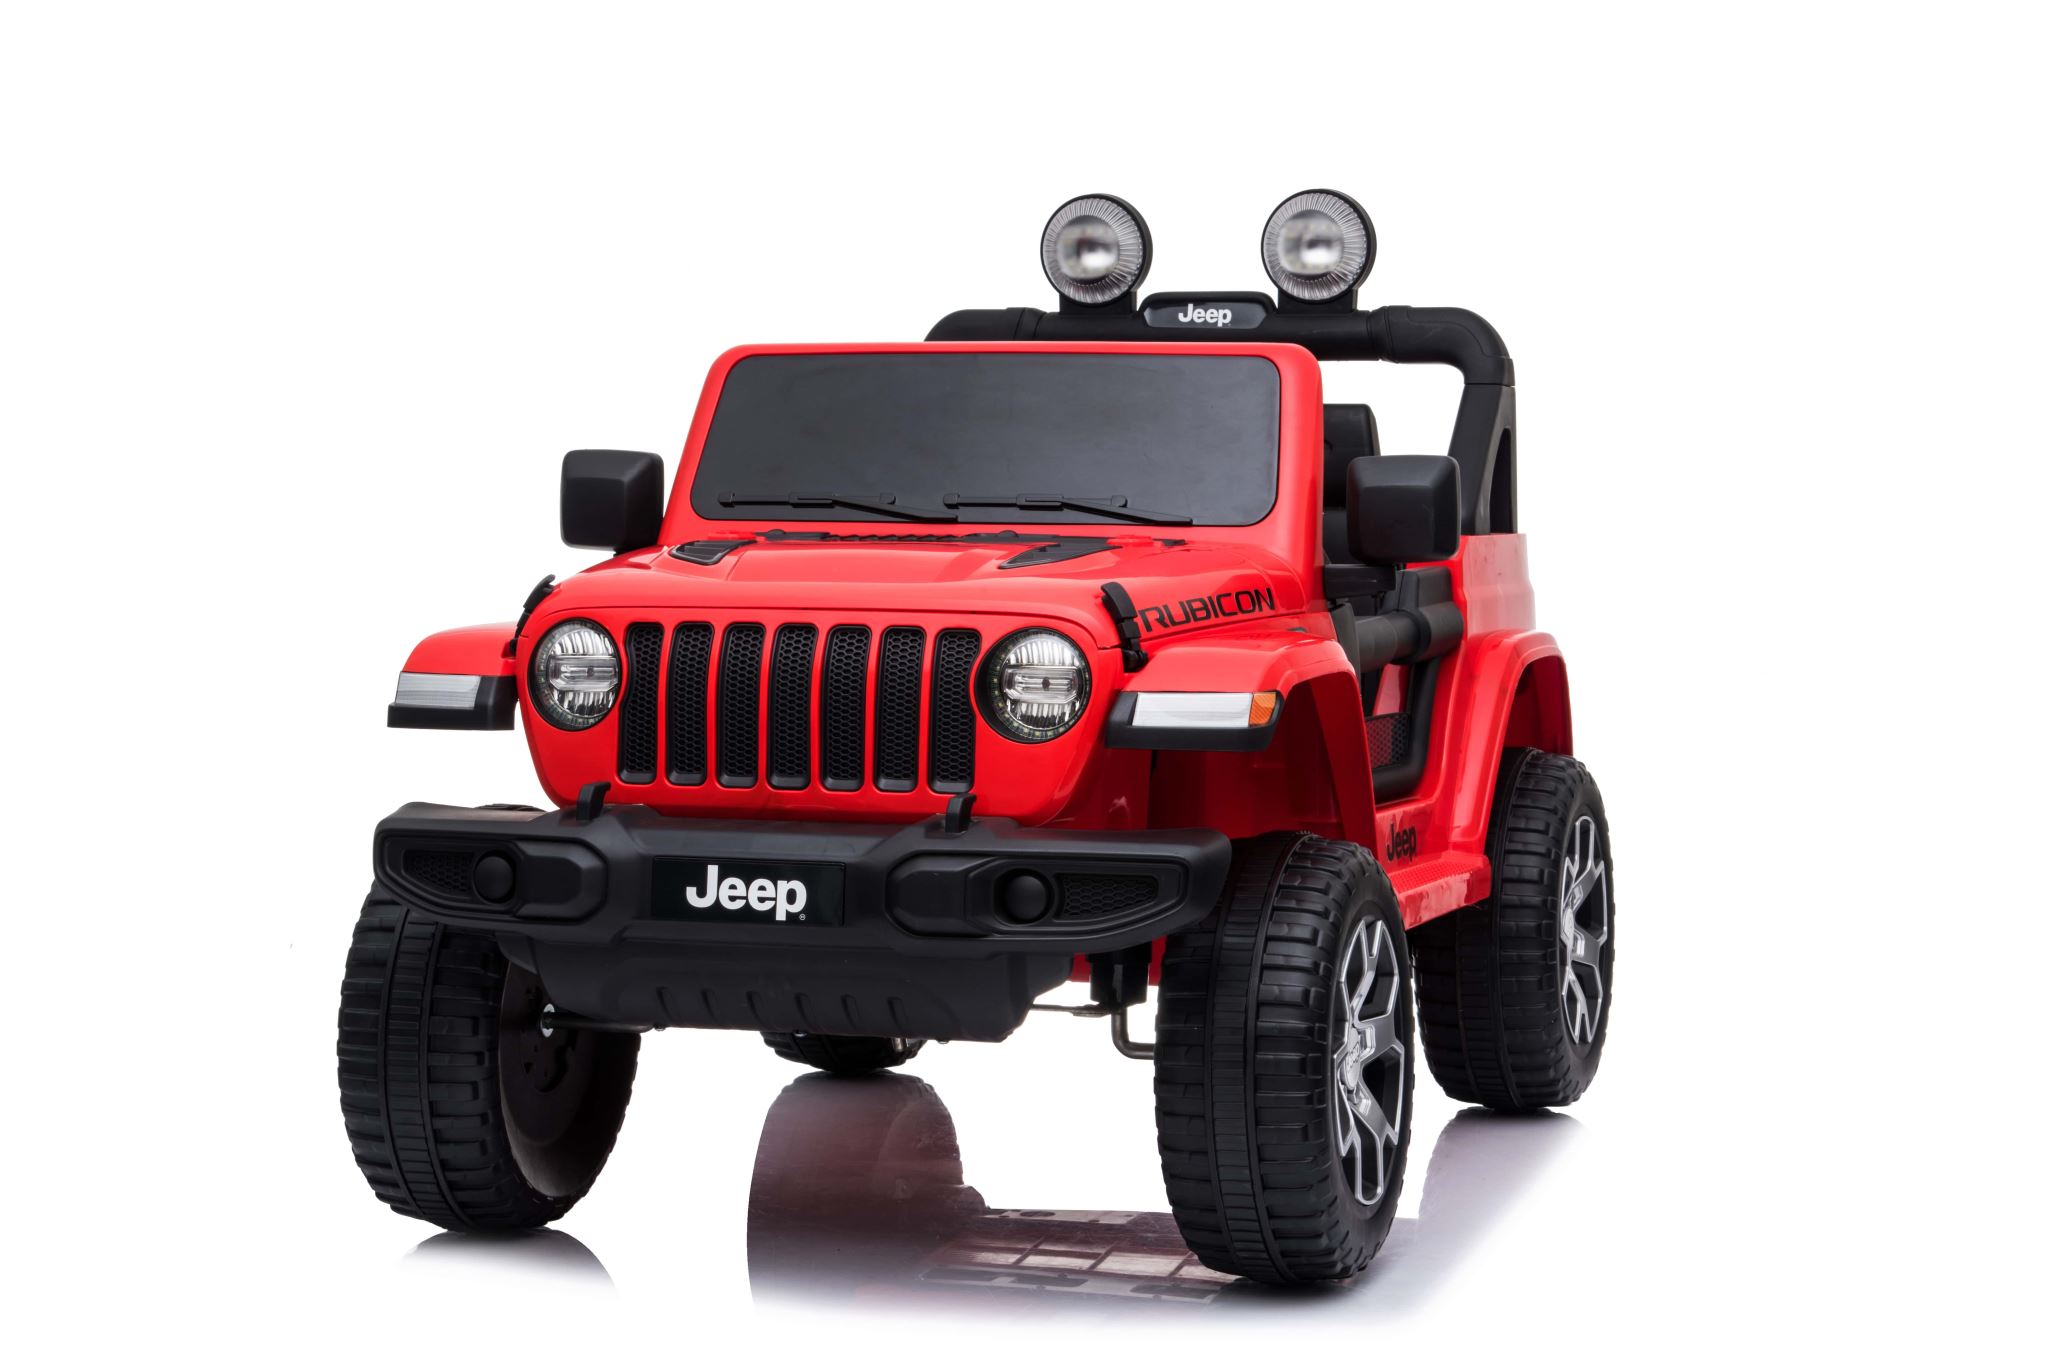 KIDS RIDE ON TOY CAR JEEP WRANGLER WITH PARENTAL REMOTE CONTROL -  